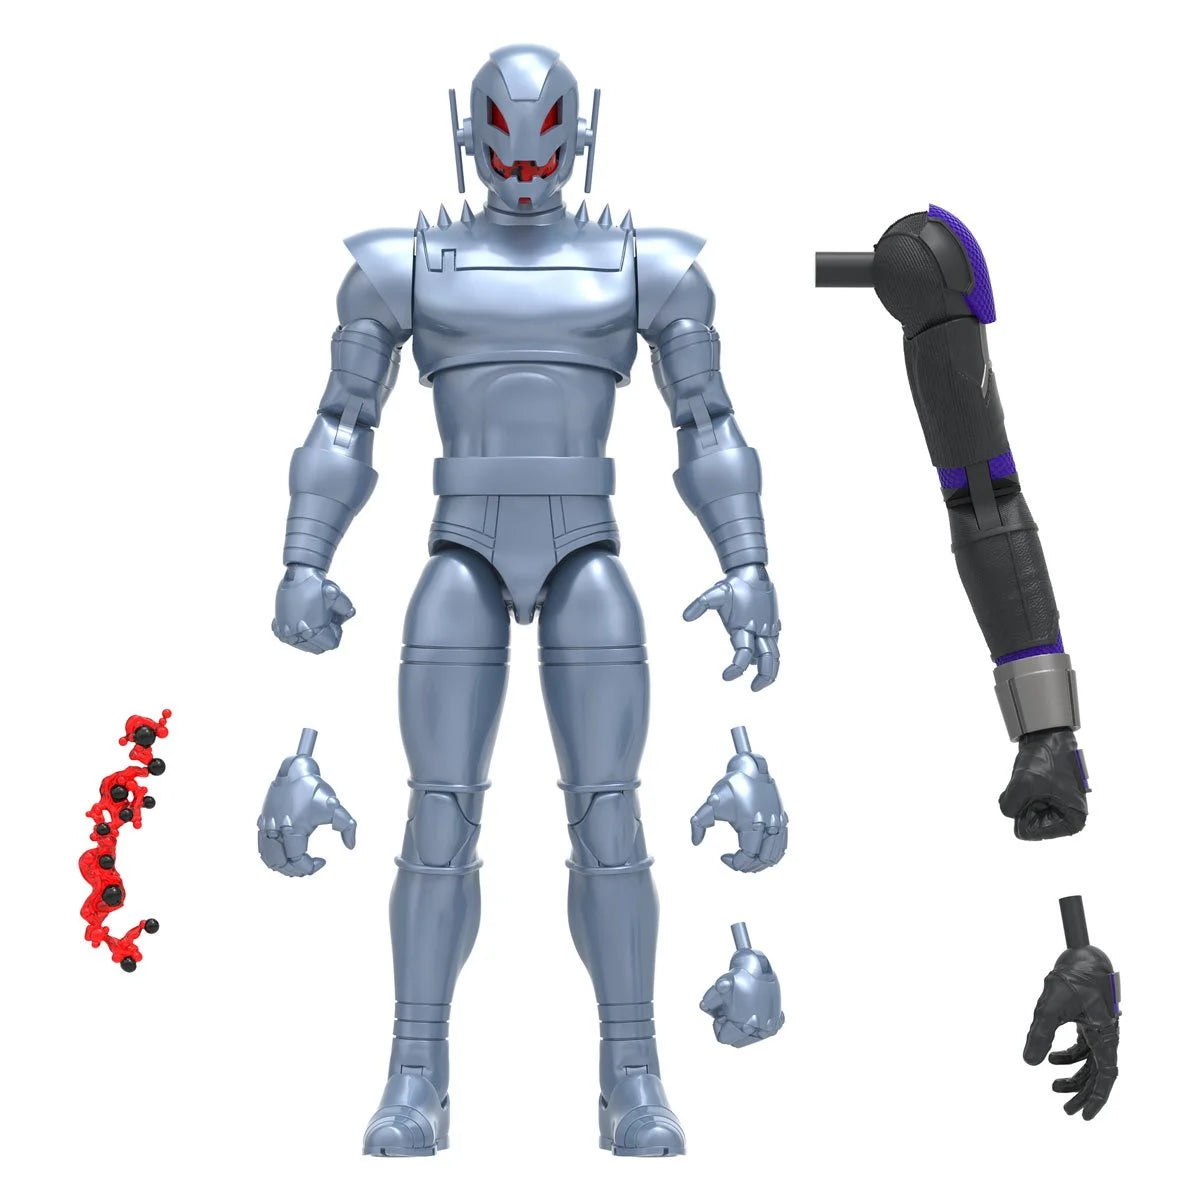 Ant-Man & the Wasp: Quantumania Marvel Legends Ultron 6-Inch Action Figure